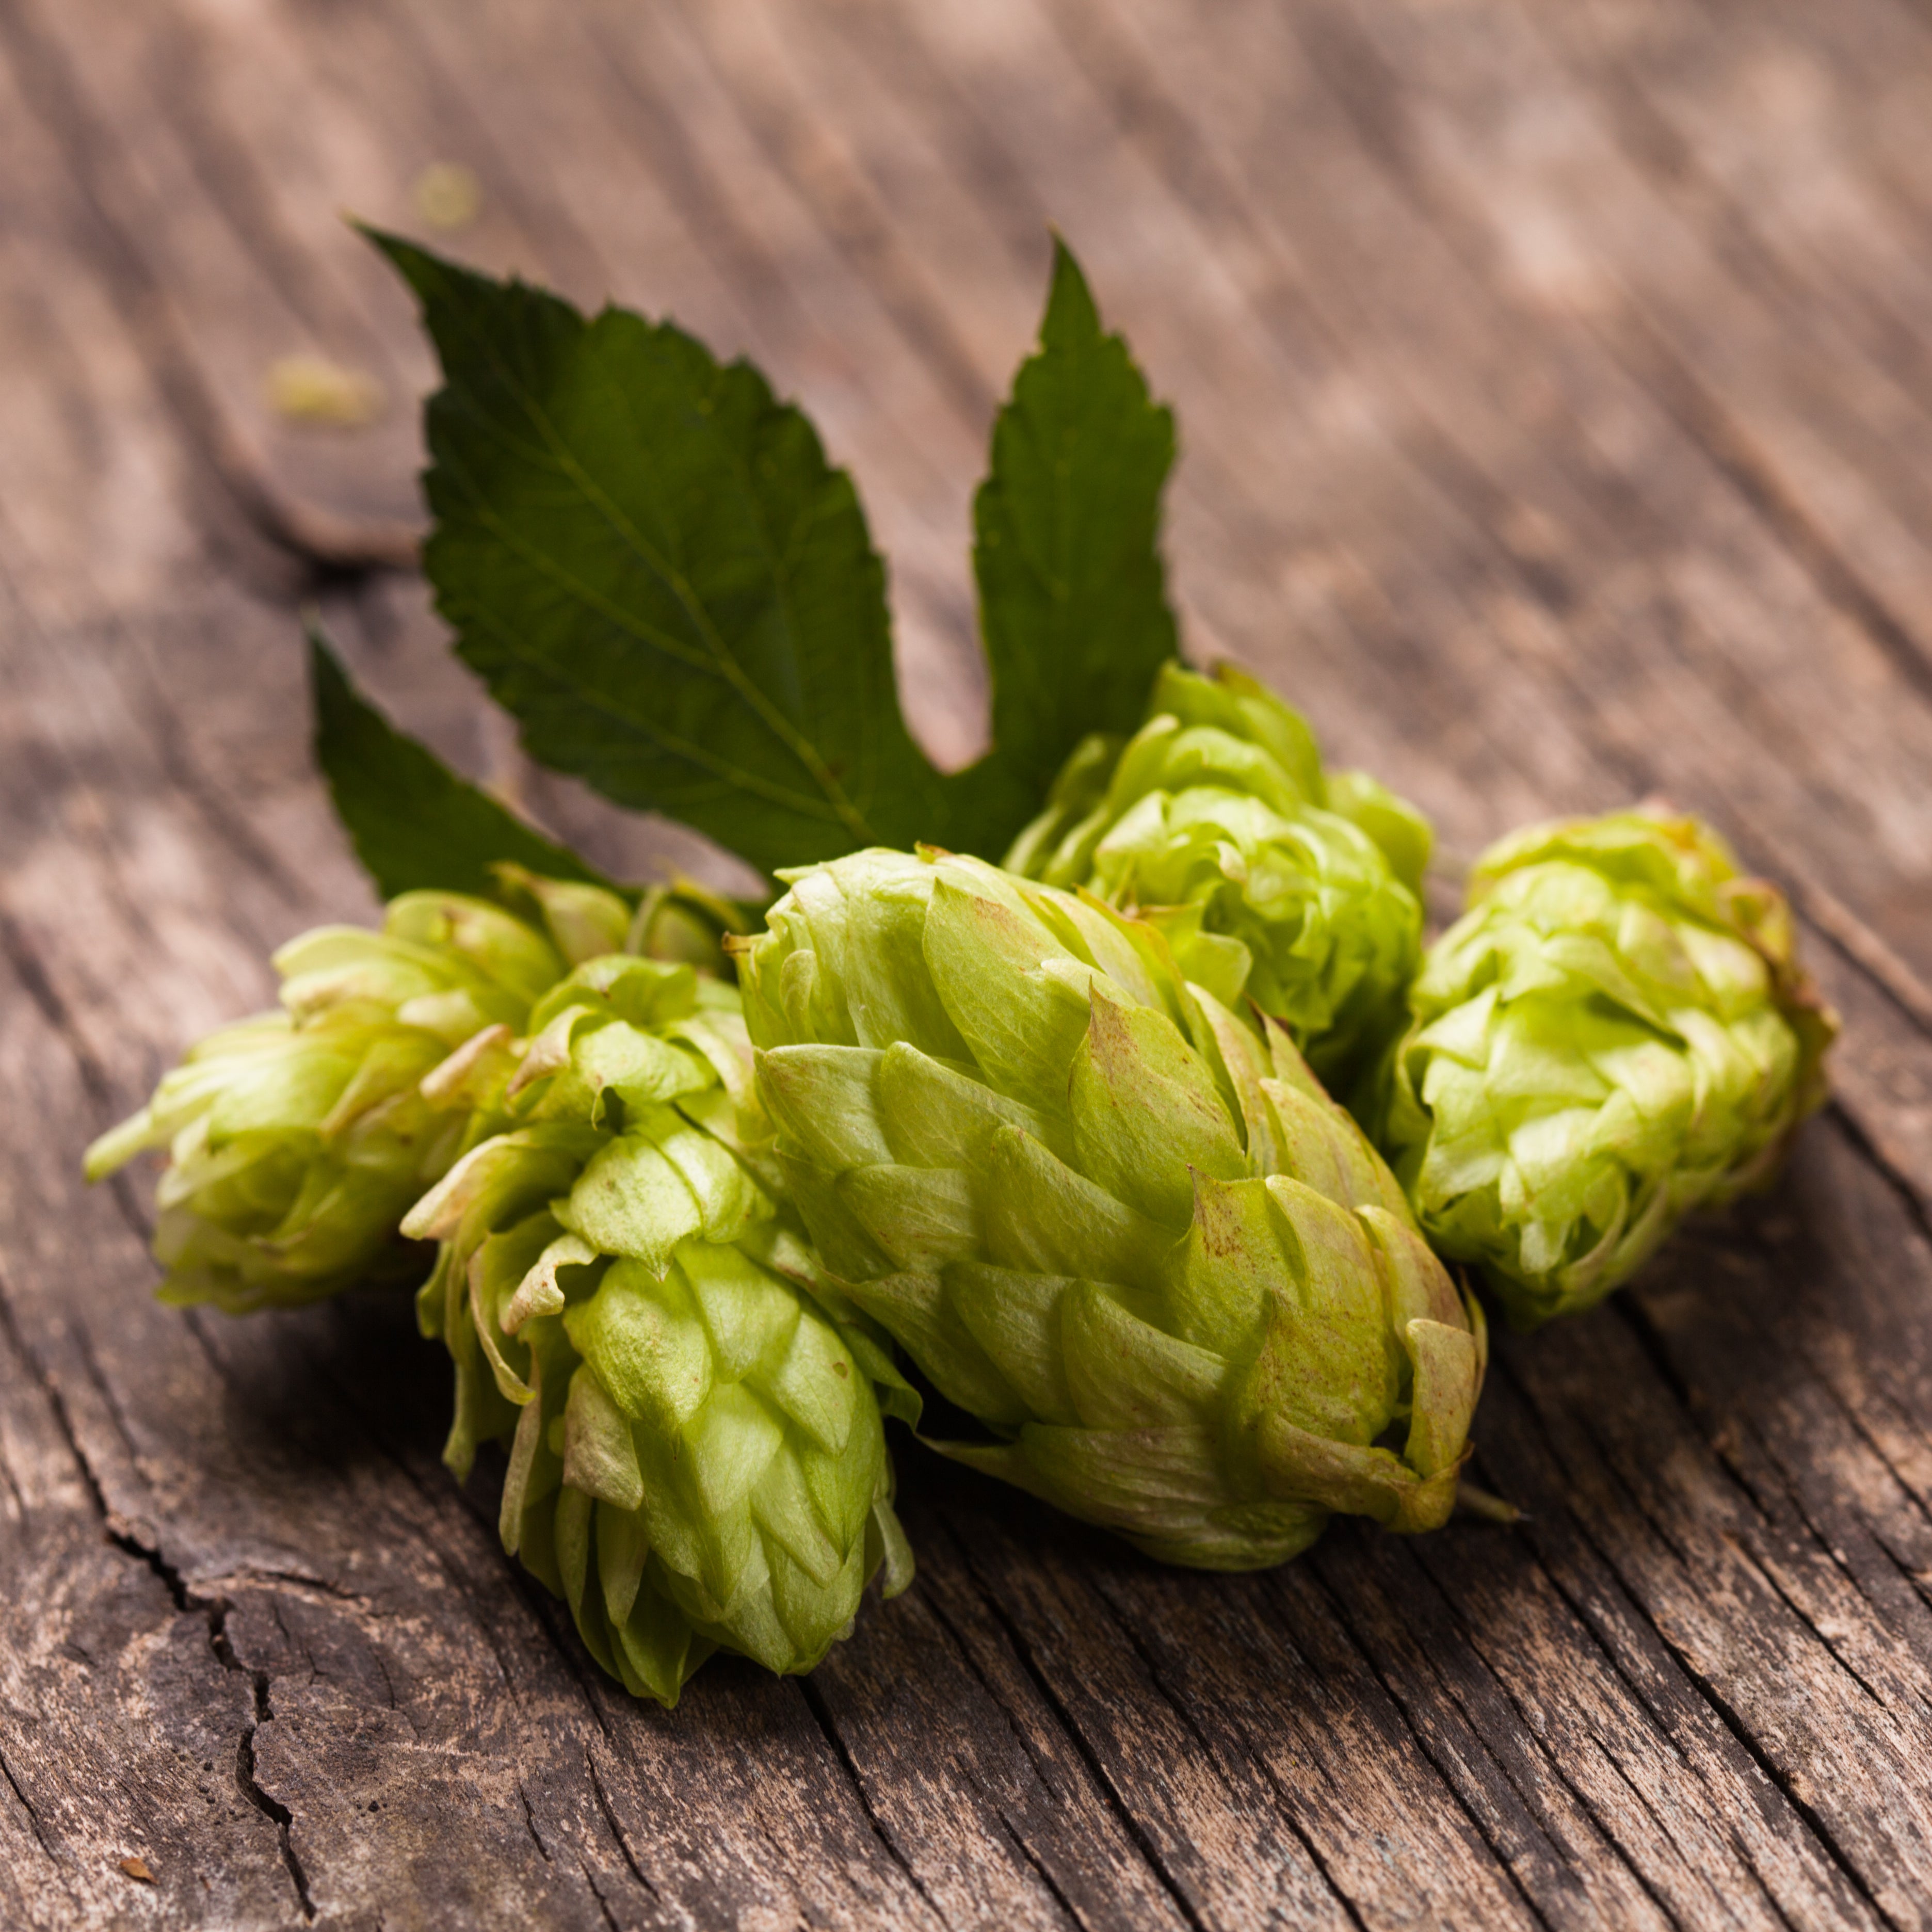 Hops - a wonderful plant not only for beer production